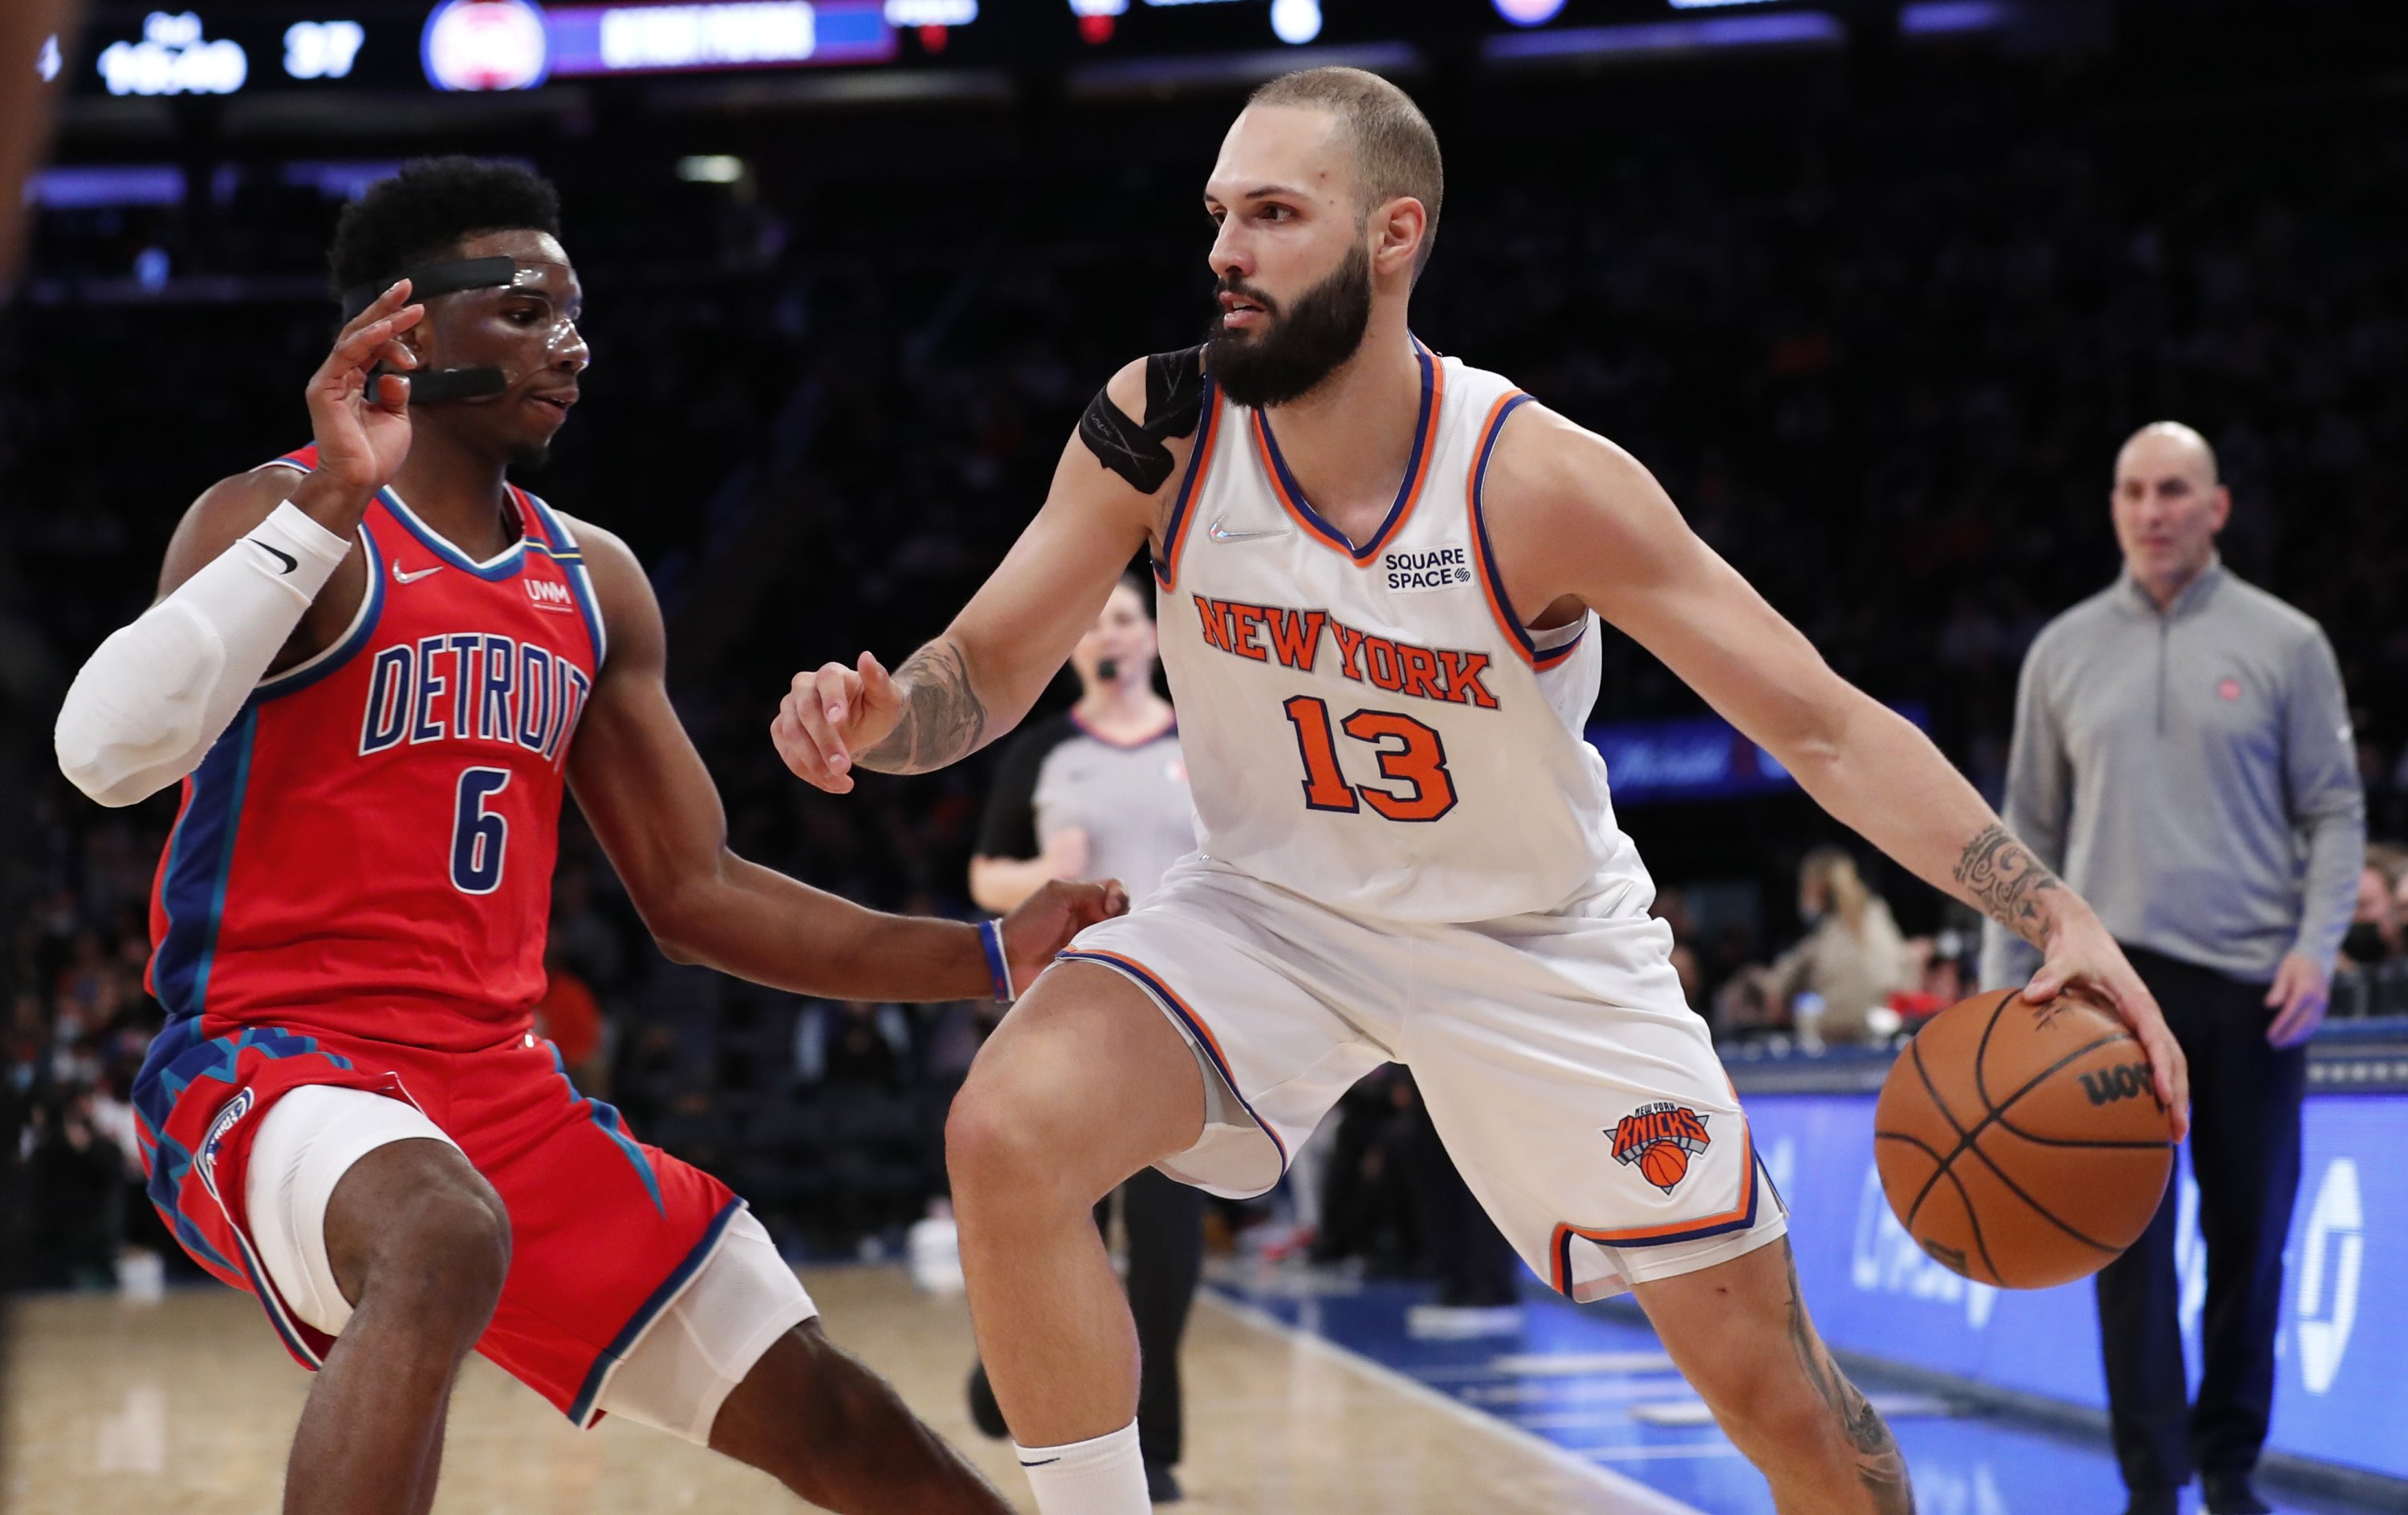 New York Knicks guard Evan Fournier (R) drives to the basket against Detroit Pistons guard Hamidou Diallo (L) during an NBA game in New York, U.S., Dec. 21, 2021. (AP Photo)